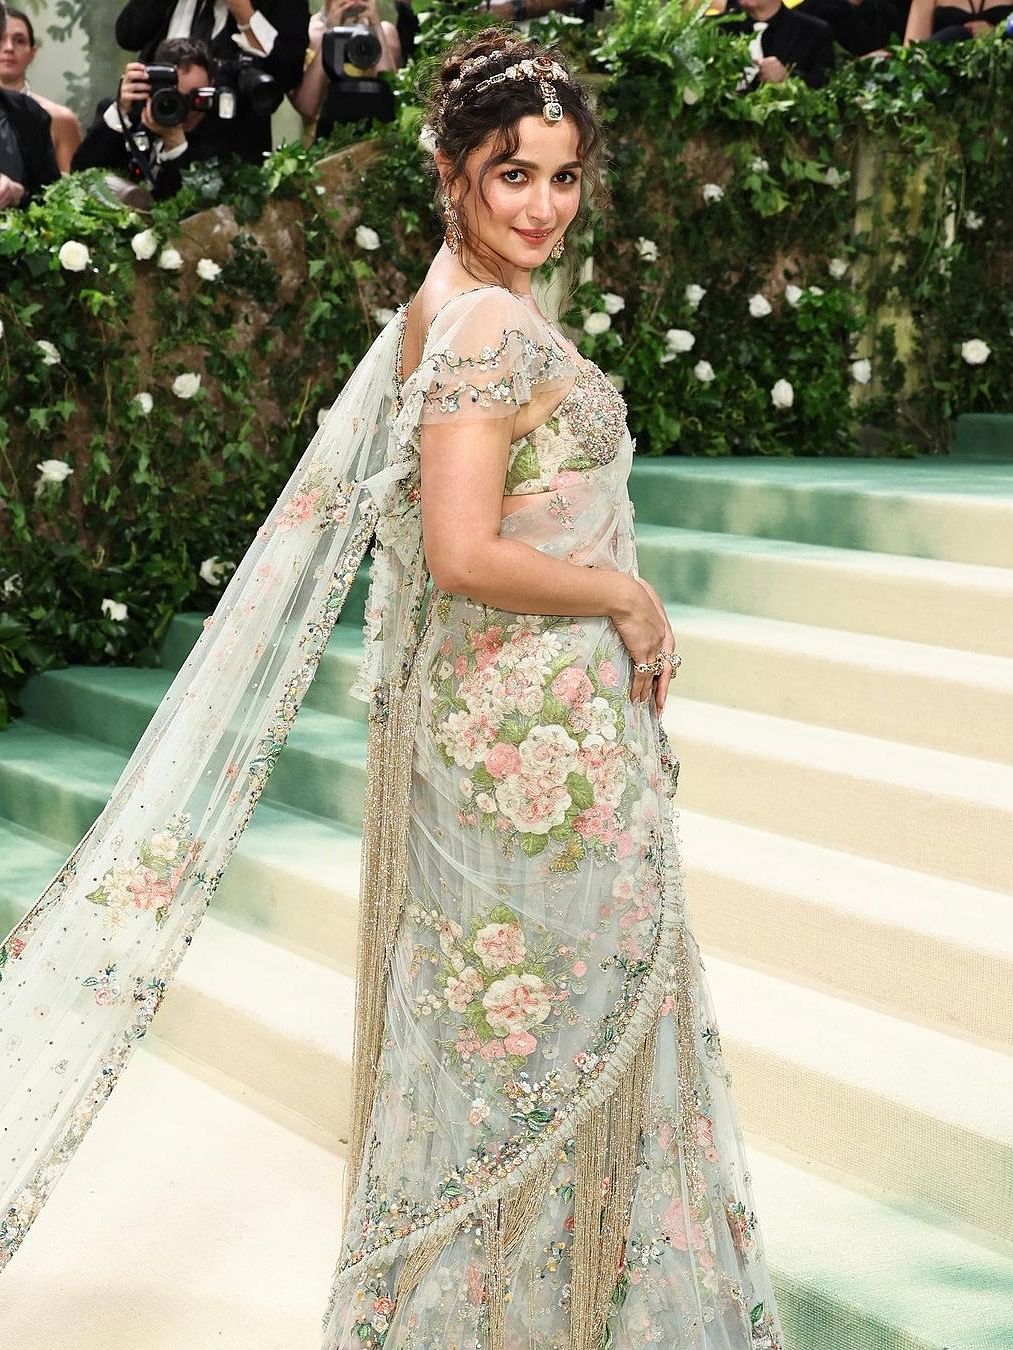 The epitome of grace and sophistication, Alia chose to adorn herself in a breathtaking Sabyasachi saree, paying homage to both her Indian roots and the event's theme.